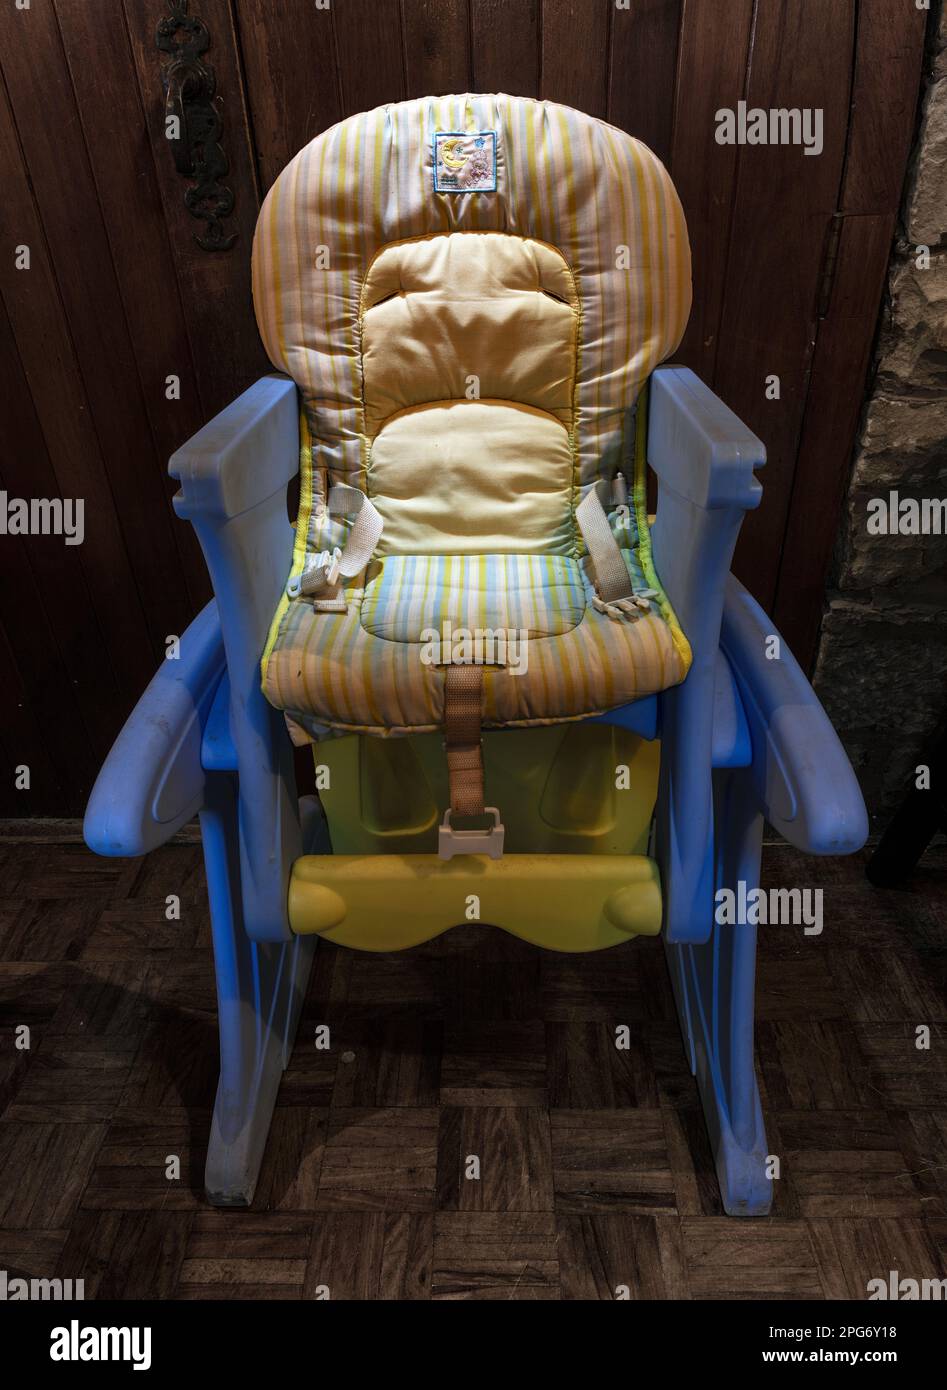 The blue baby-chair with unhappy baby in the Himeville Arms Hotel dining room. Stock Photo